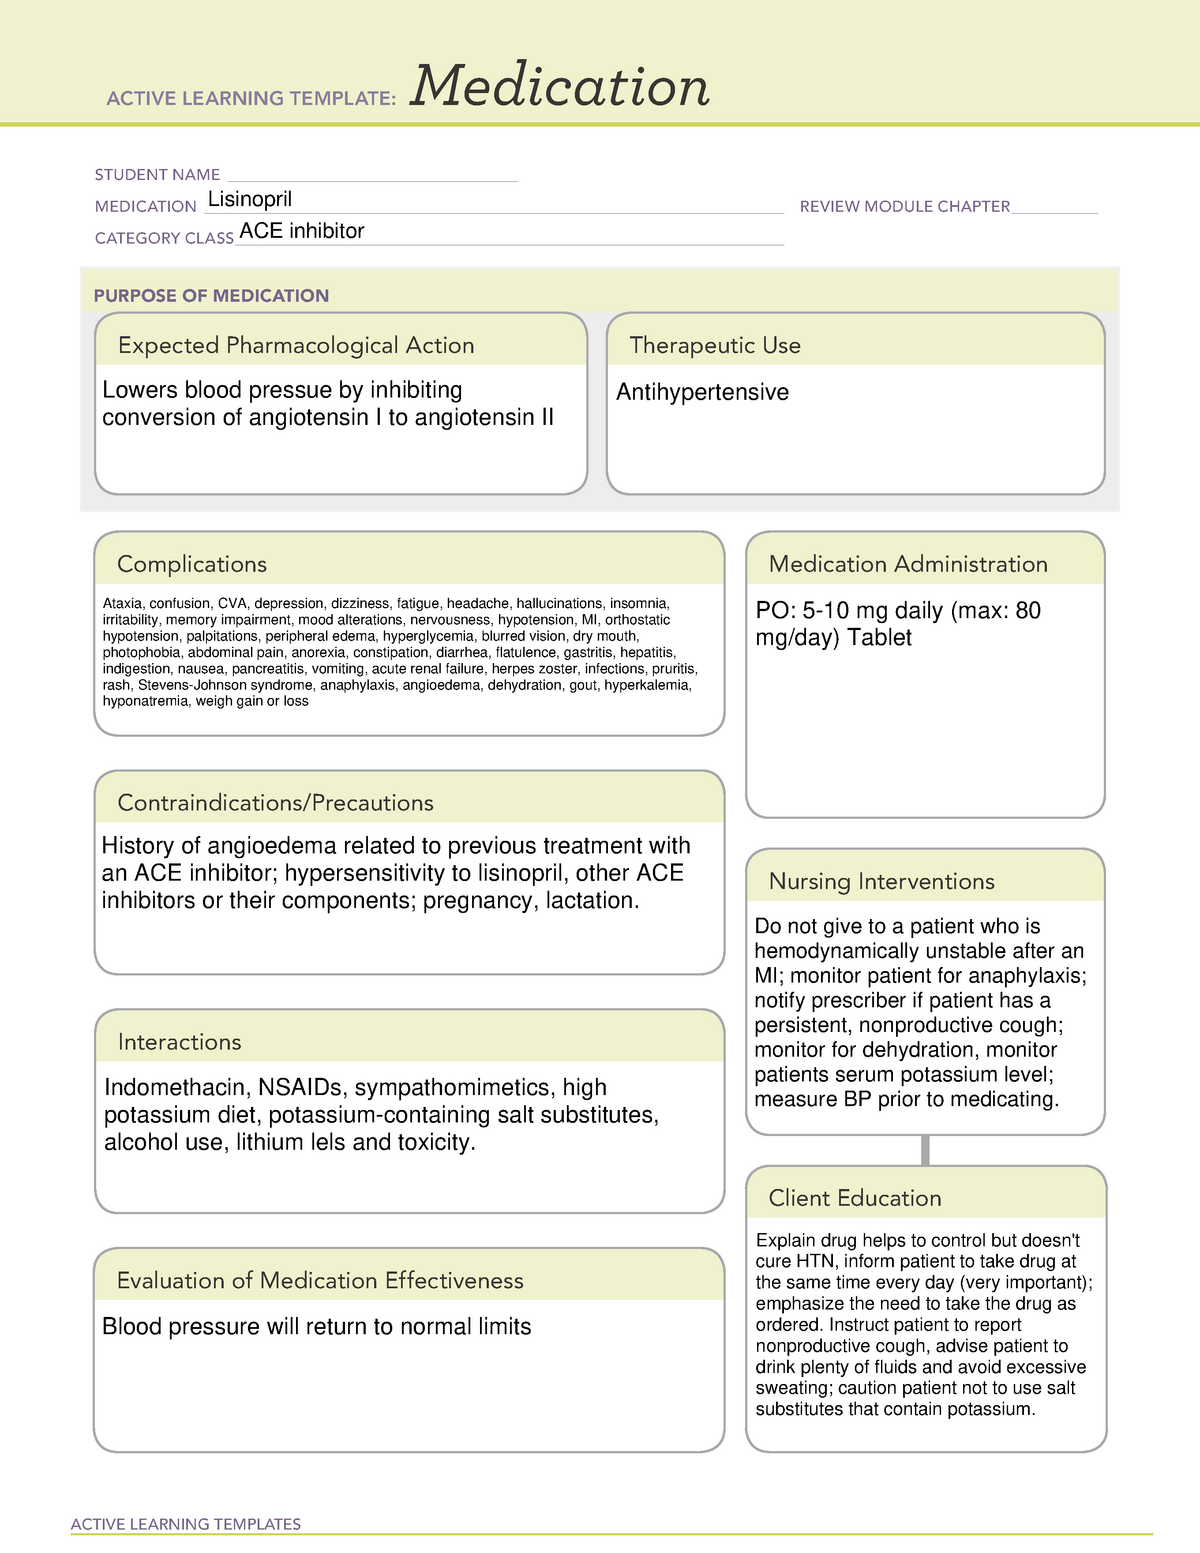 Lisinopril Med card ACTIVE LEARNING TEMPLATES Medication STUDENT